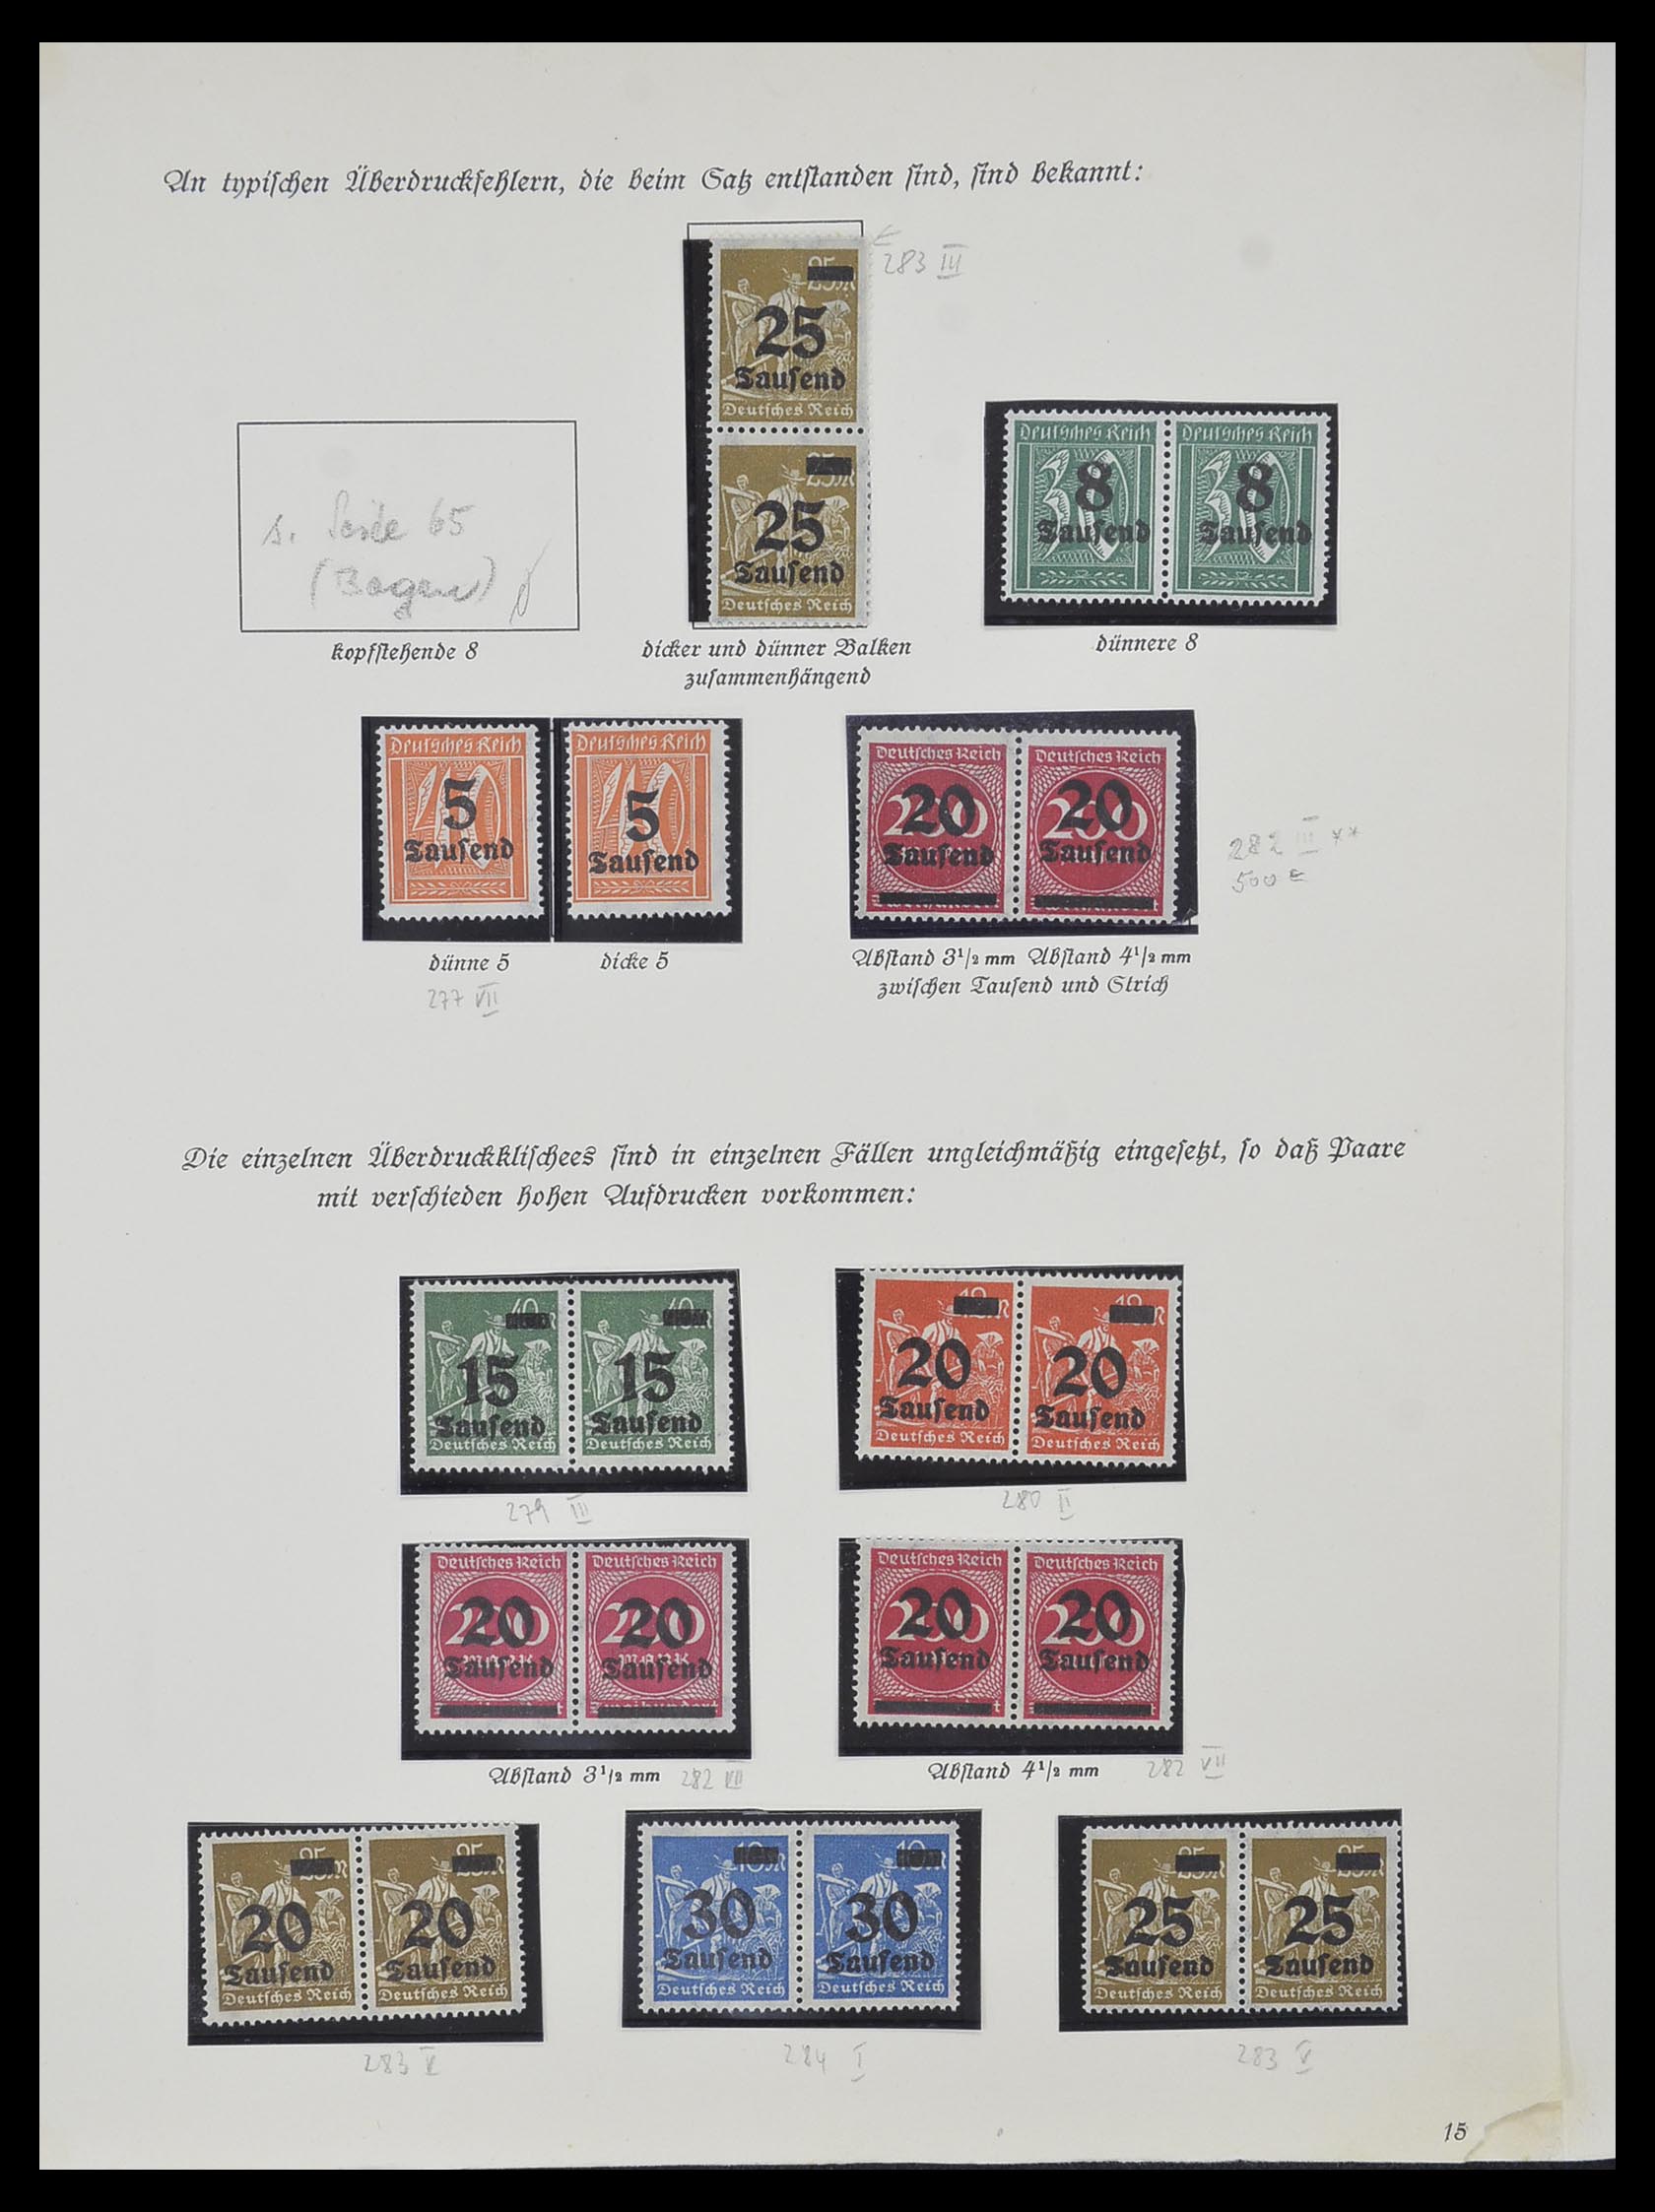 33957 006 - Stamp collection 33957 German Reich infla 1923.